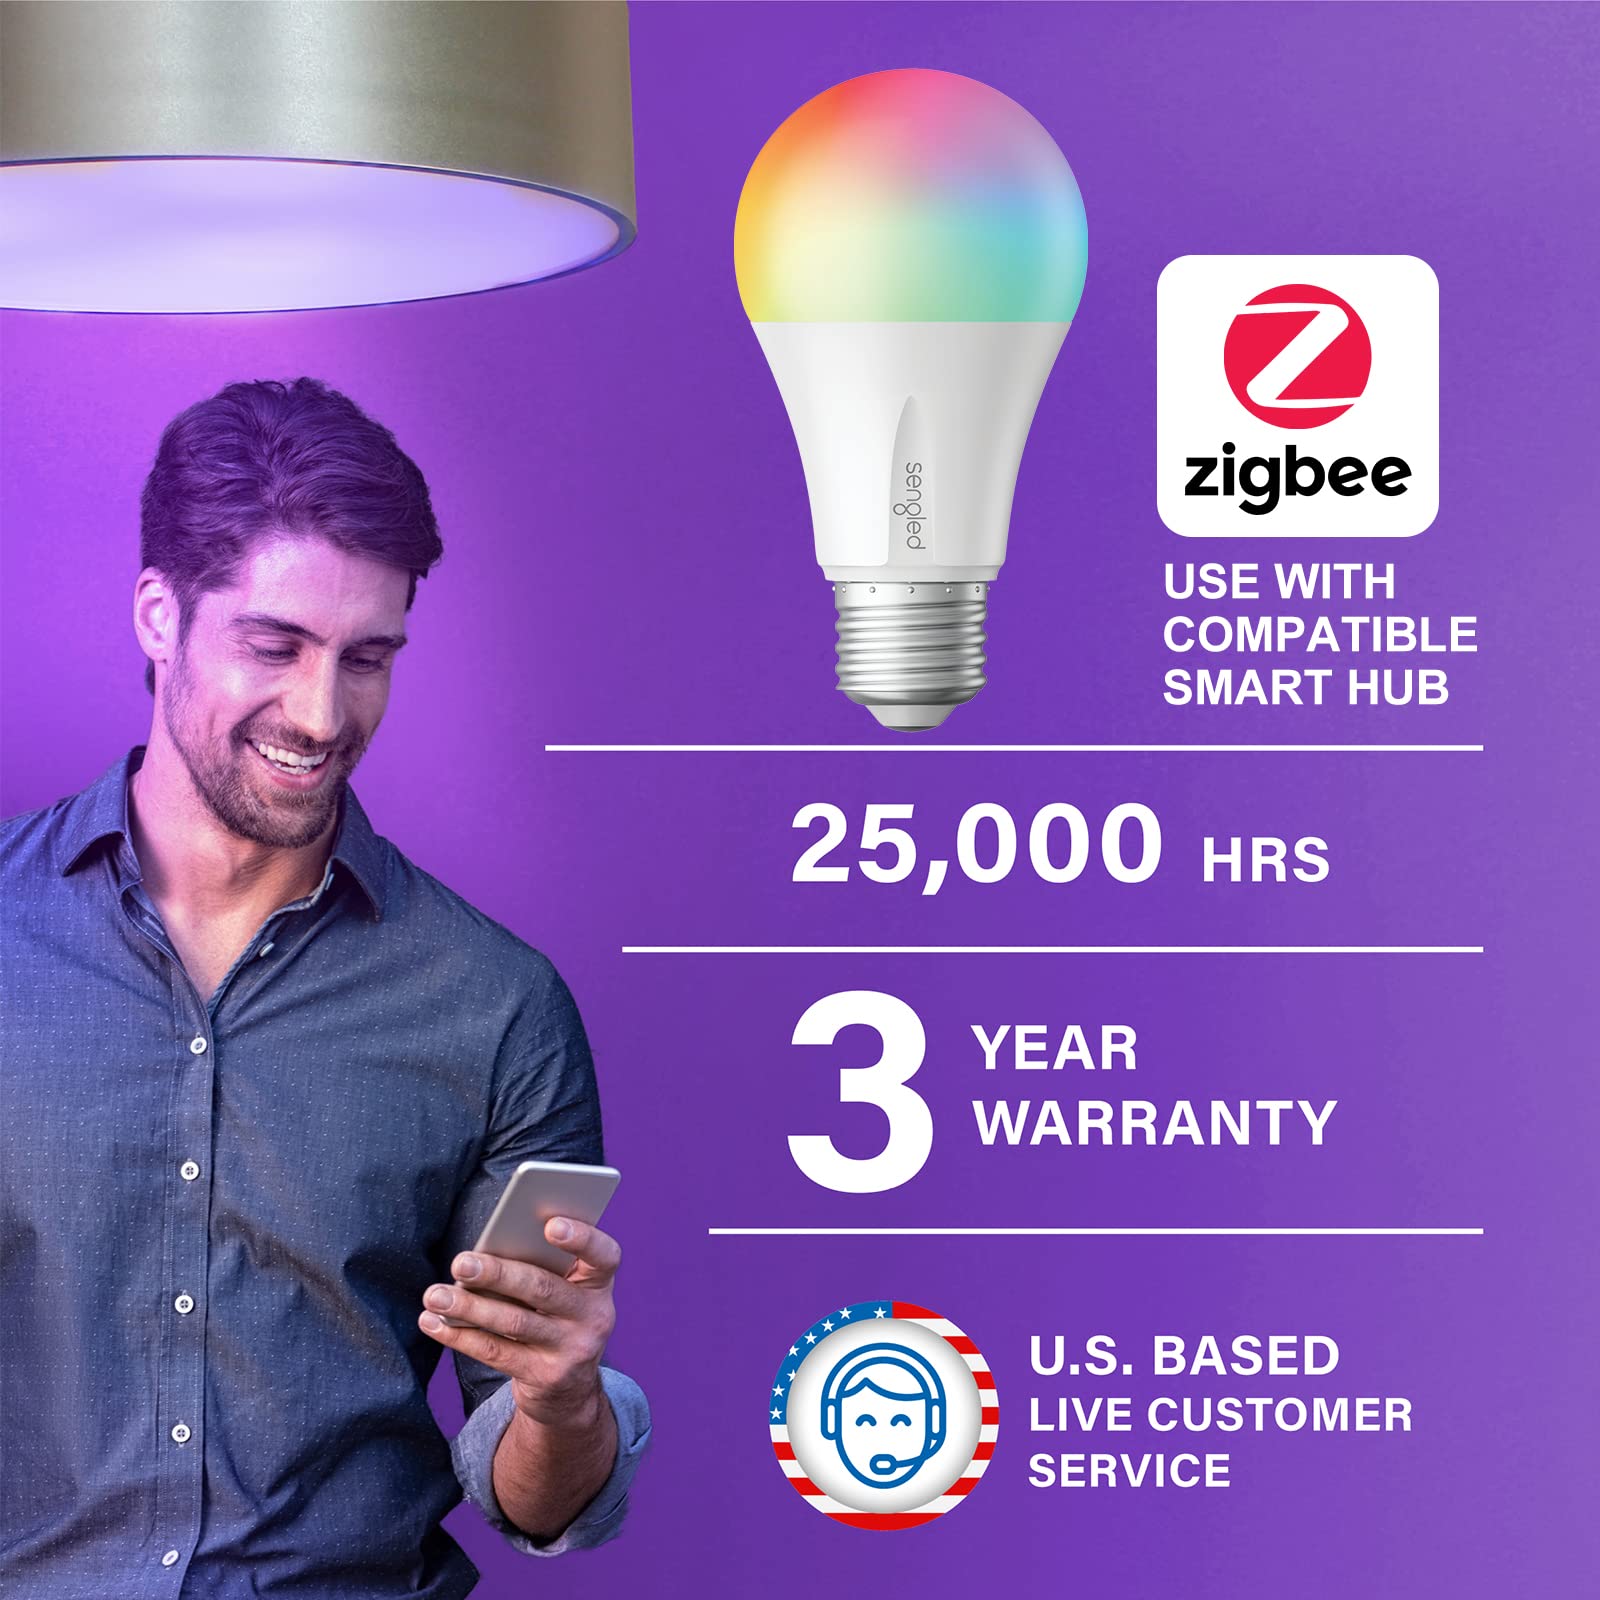 Sengled Alexa Light Bulb, Zigbee Bulb Smart Hub Required, Works with Alexa and SmartThings, Voice Control with Echo Show 10 with built-in Hub, Color Changing 60W Equivalent A19 Smart Light Bulbs, 4PK